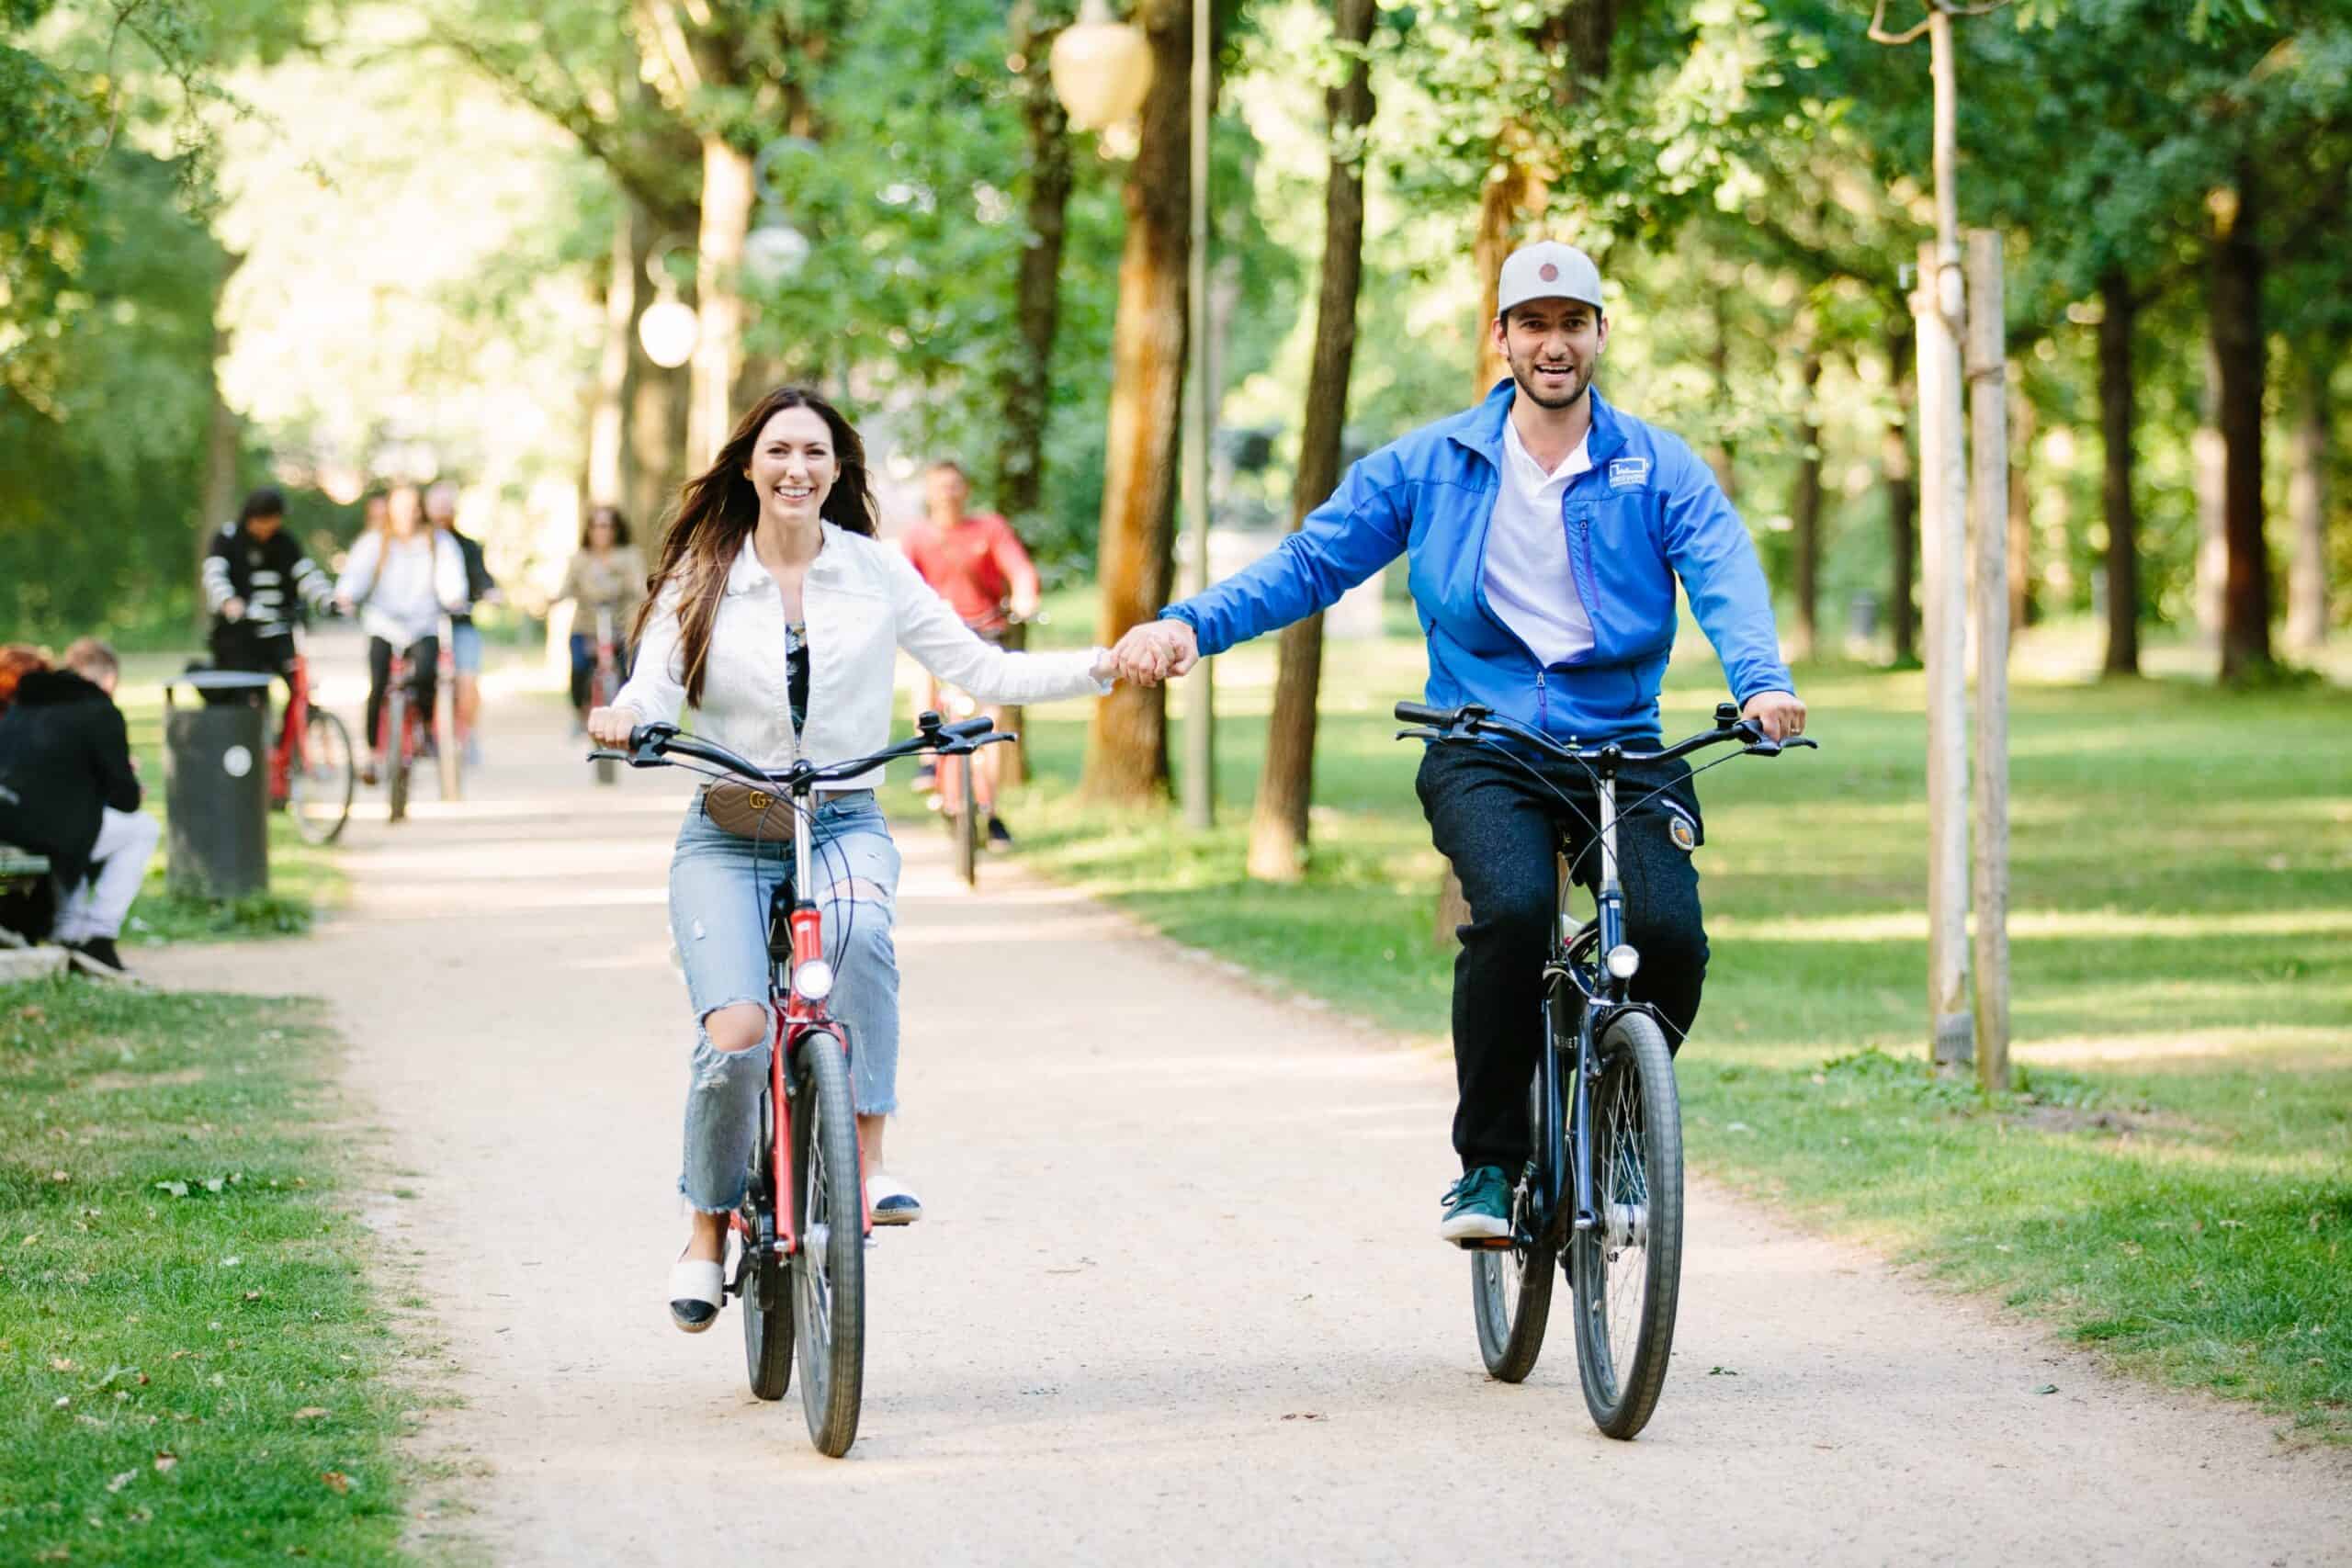 Two people hold hands while riding through the Tiergarten in Berlin, Germany